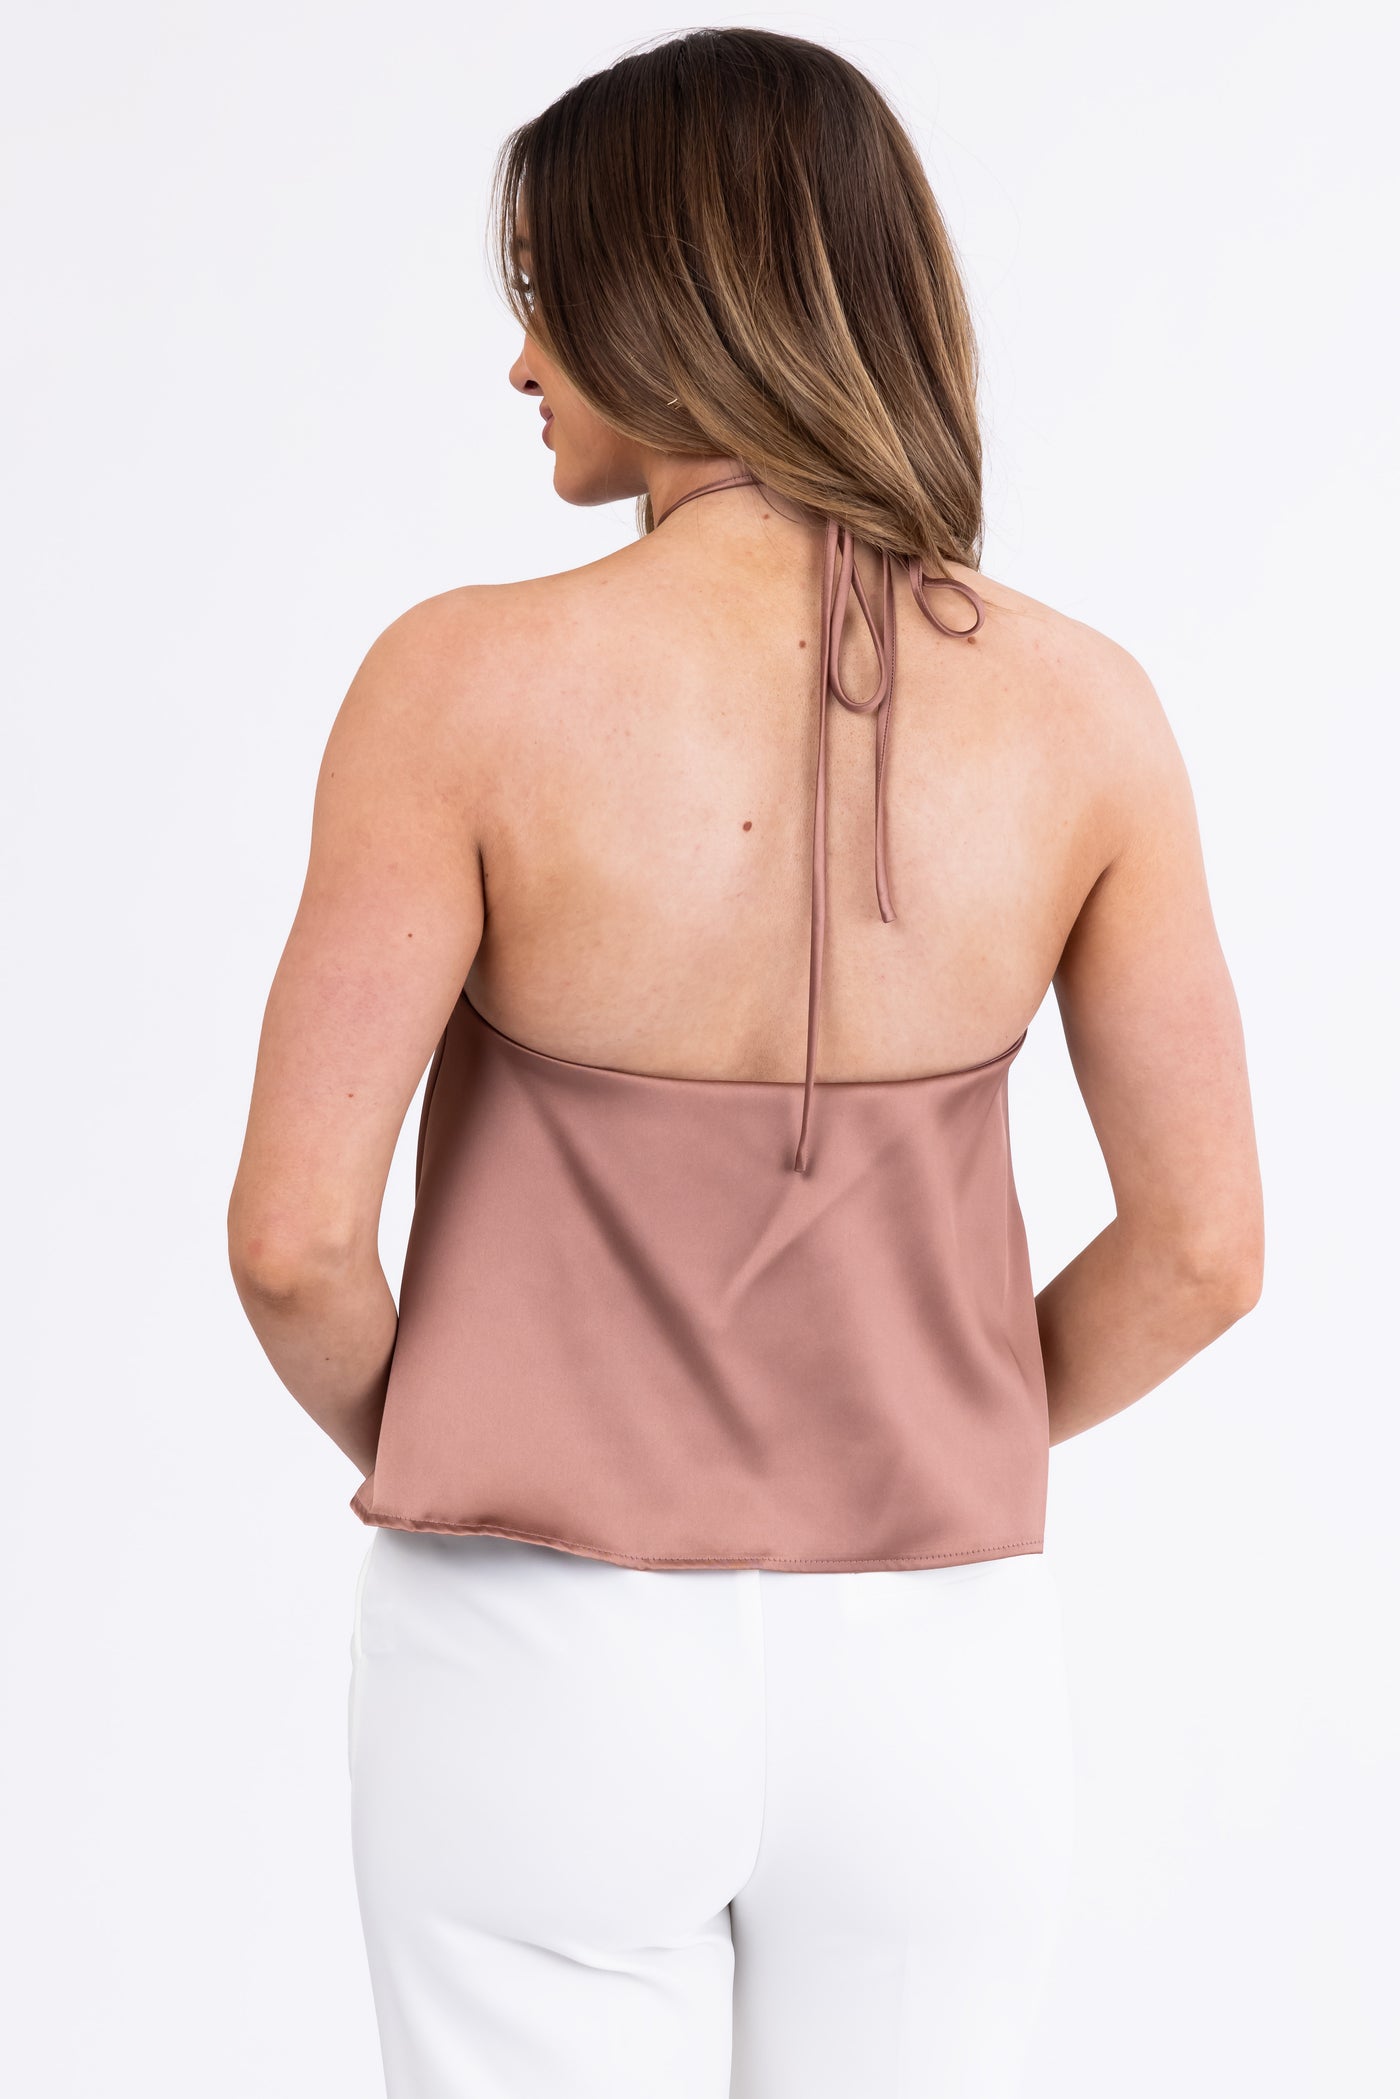 Dusty Rose Satin Halter Tank Top with Rose Accent